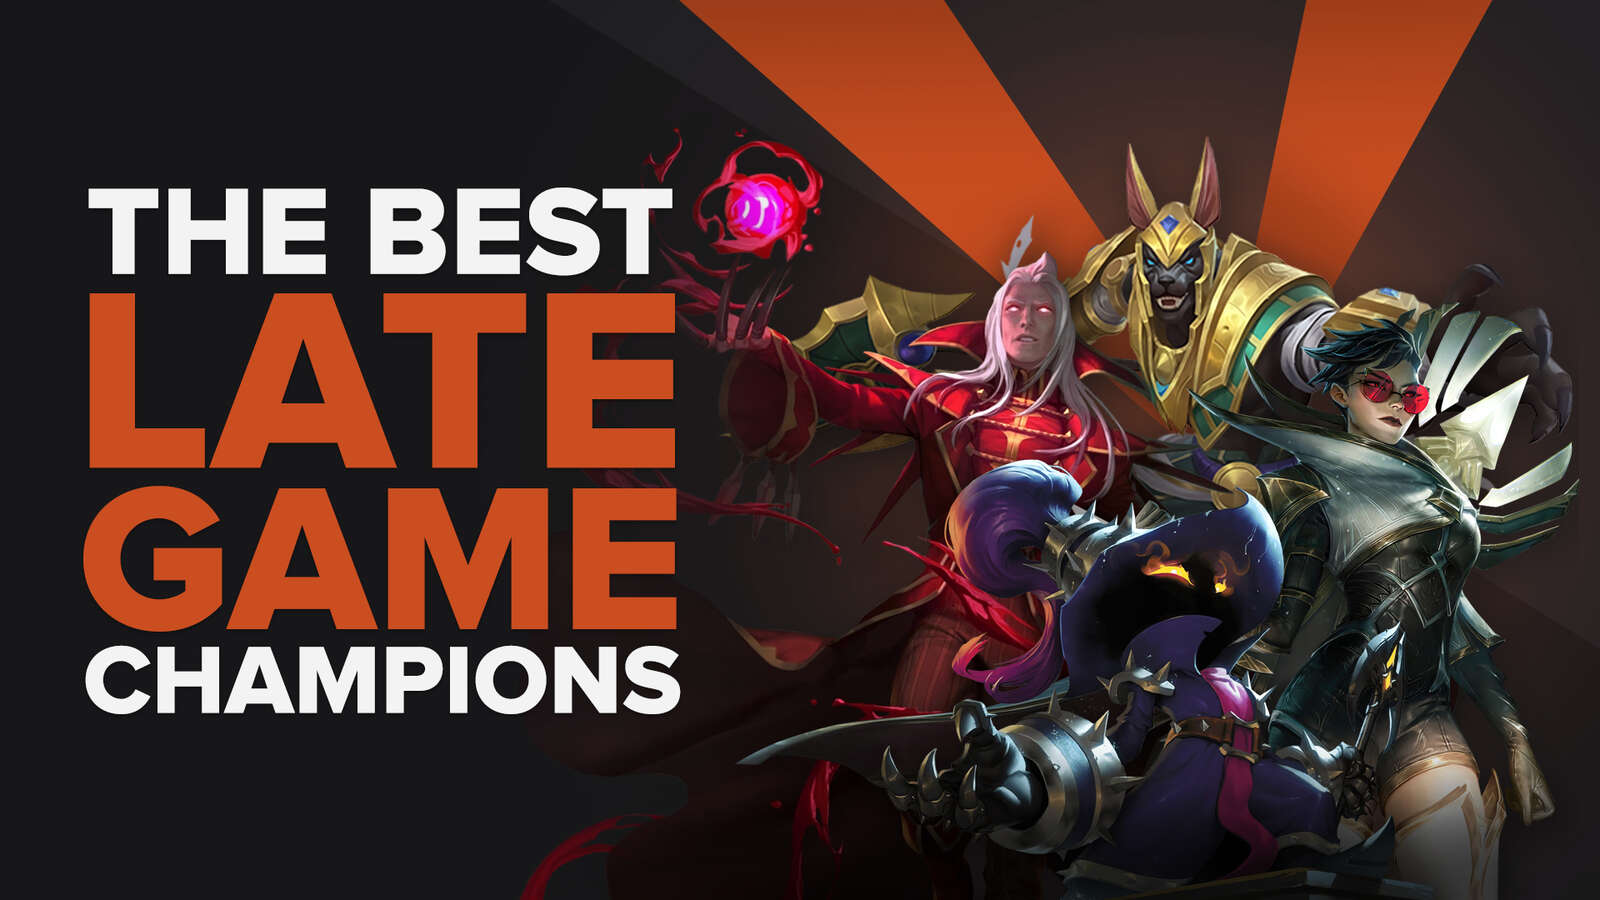 The best late game champions in League of Legends